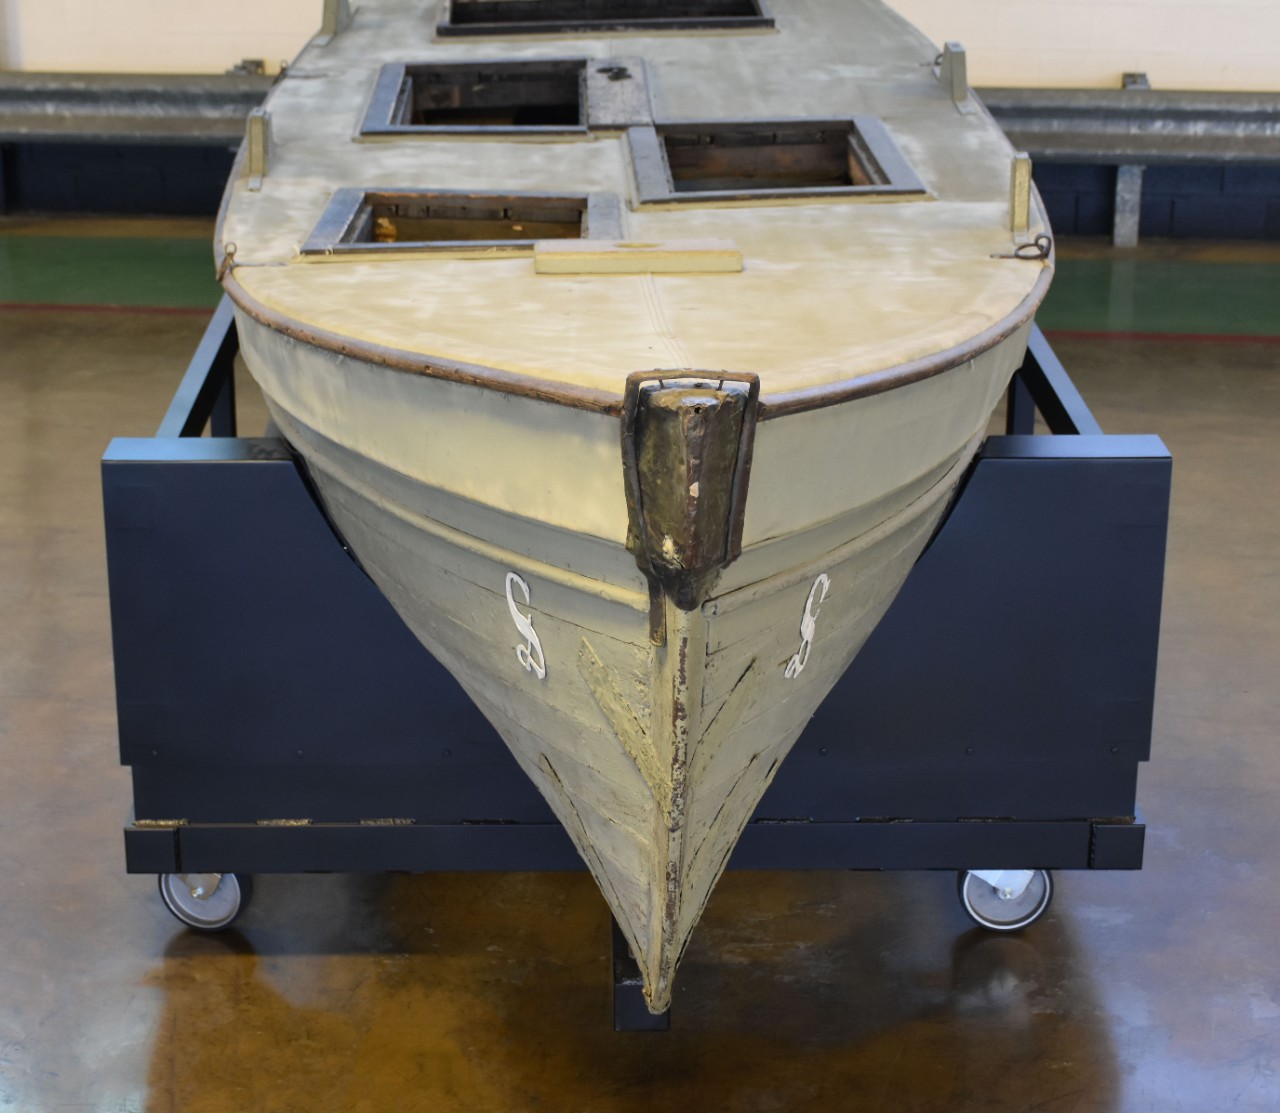 Bow view of small boat. White S painted on both sides of bow beam.